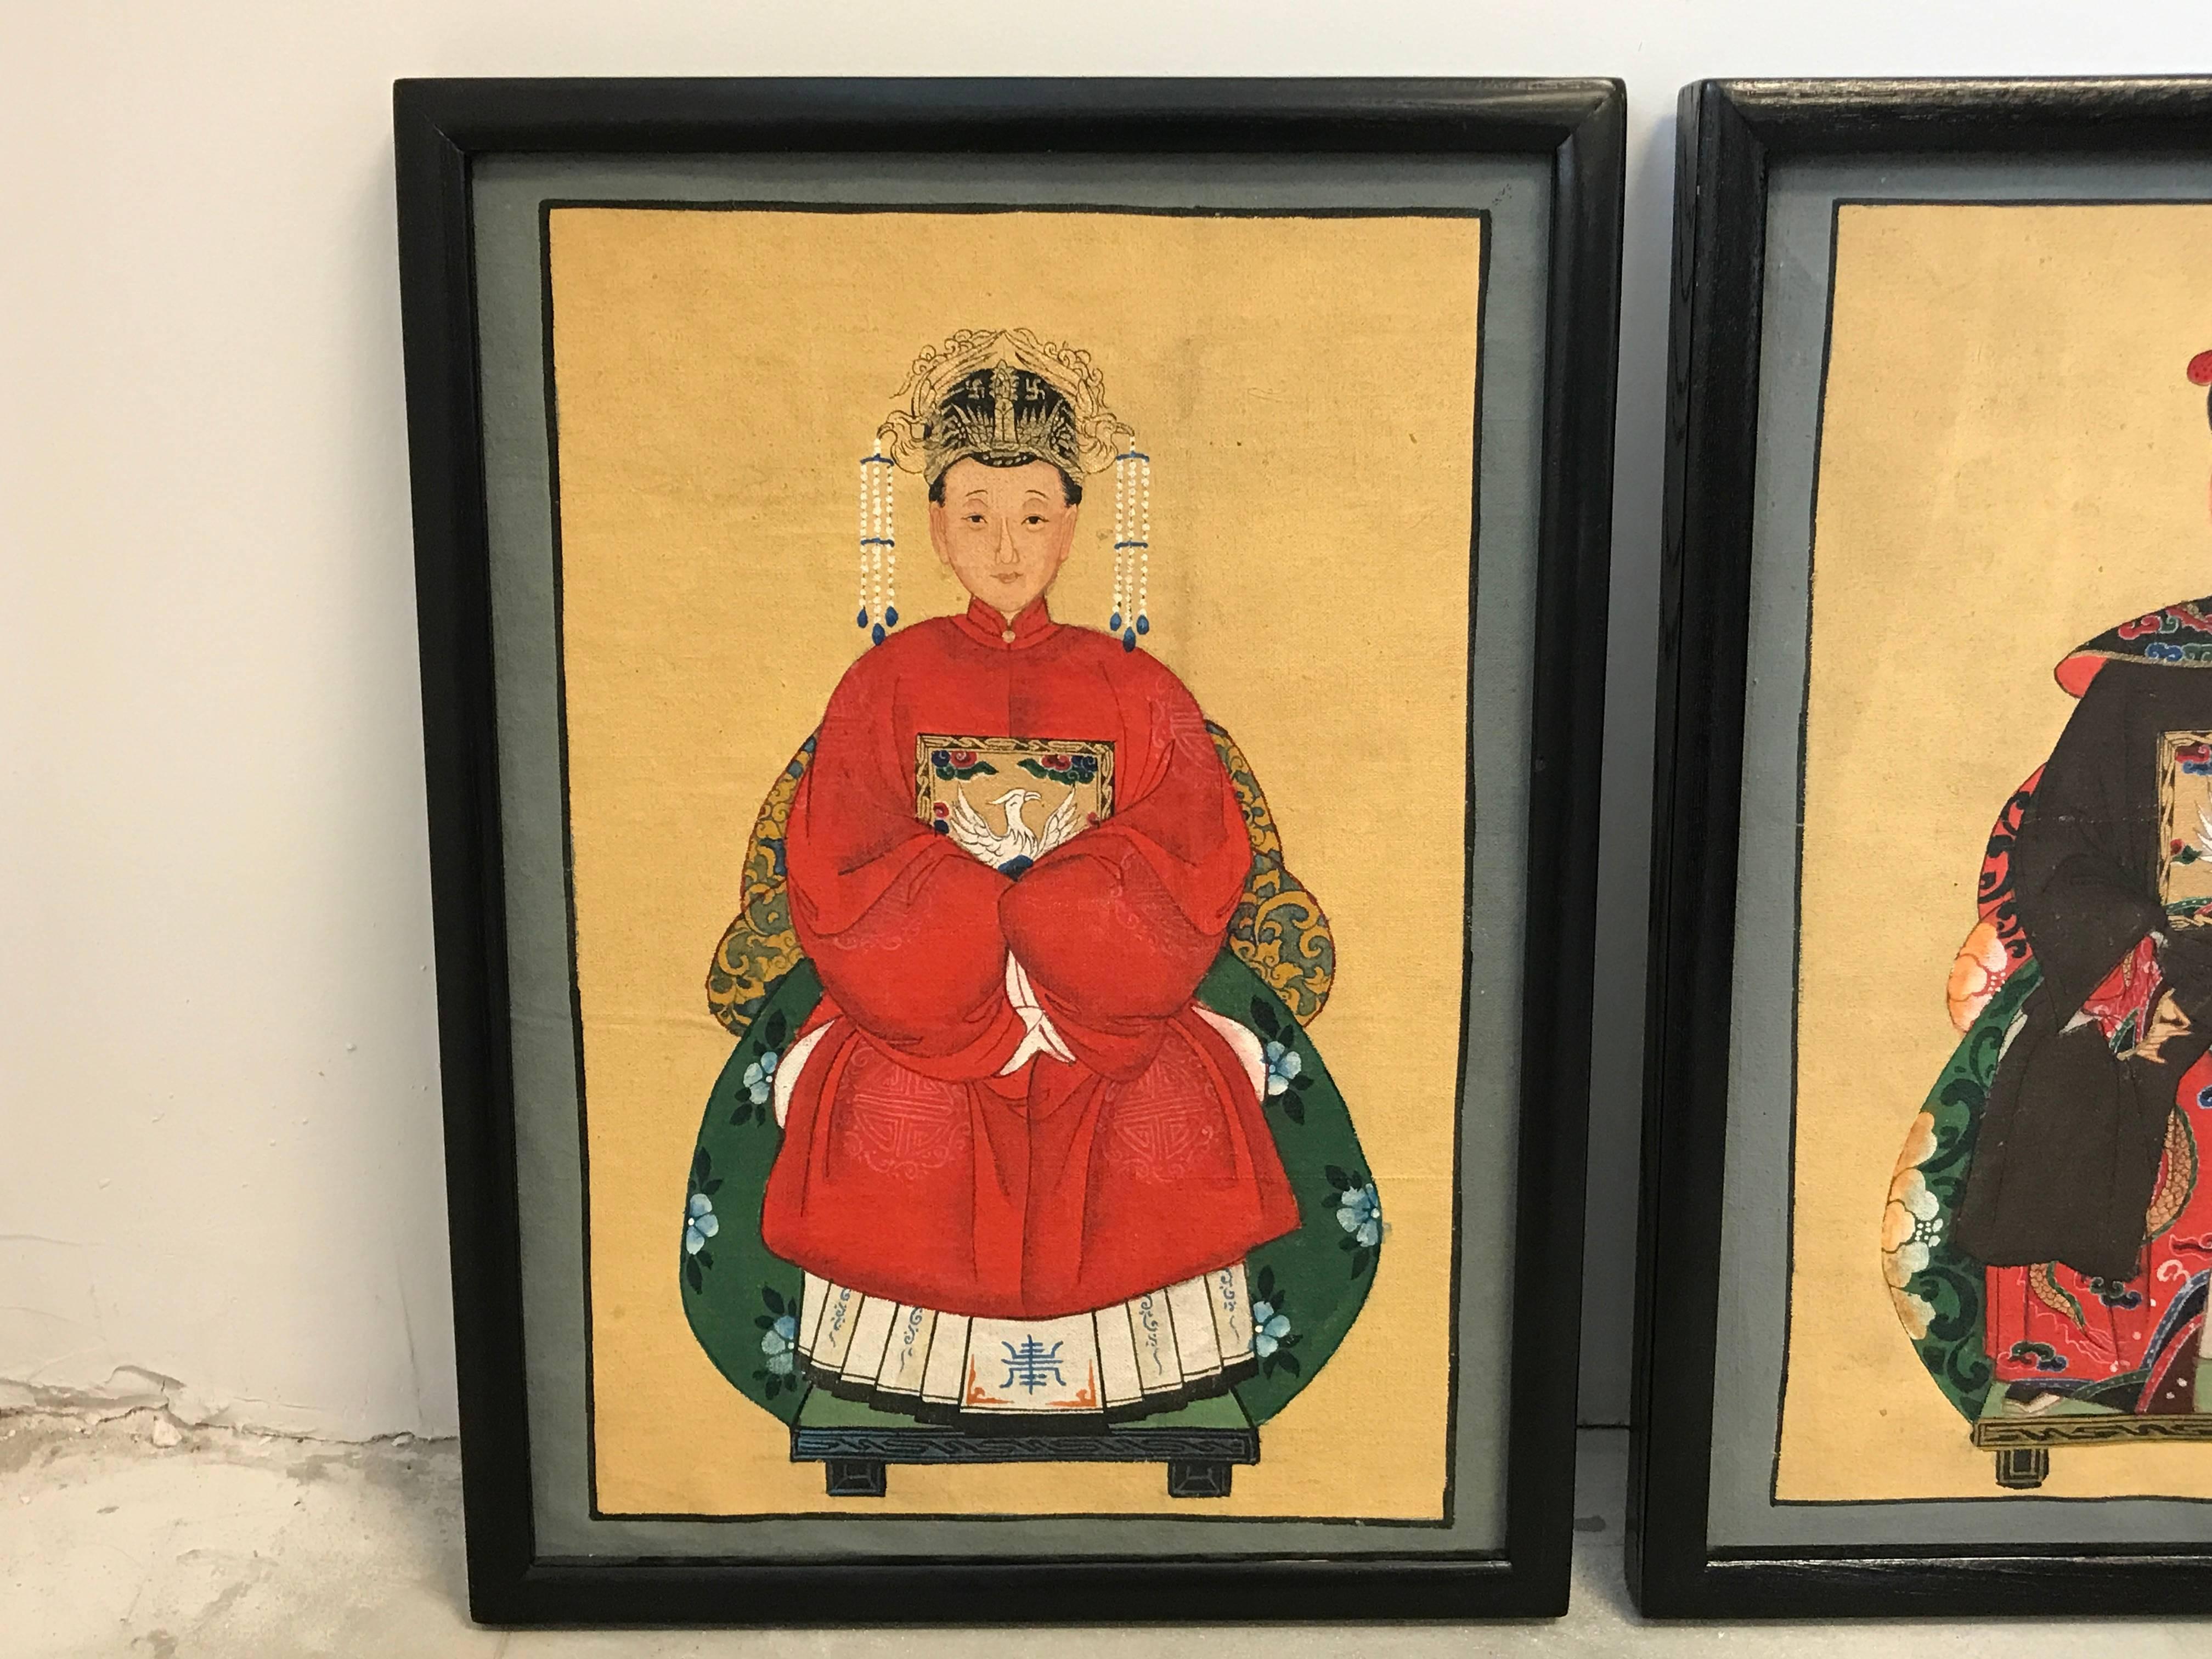 Offered is a stunning pair of 1960s Asian emperor and empress framed paintings on canvas.